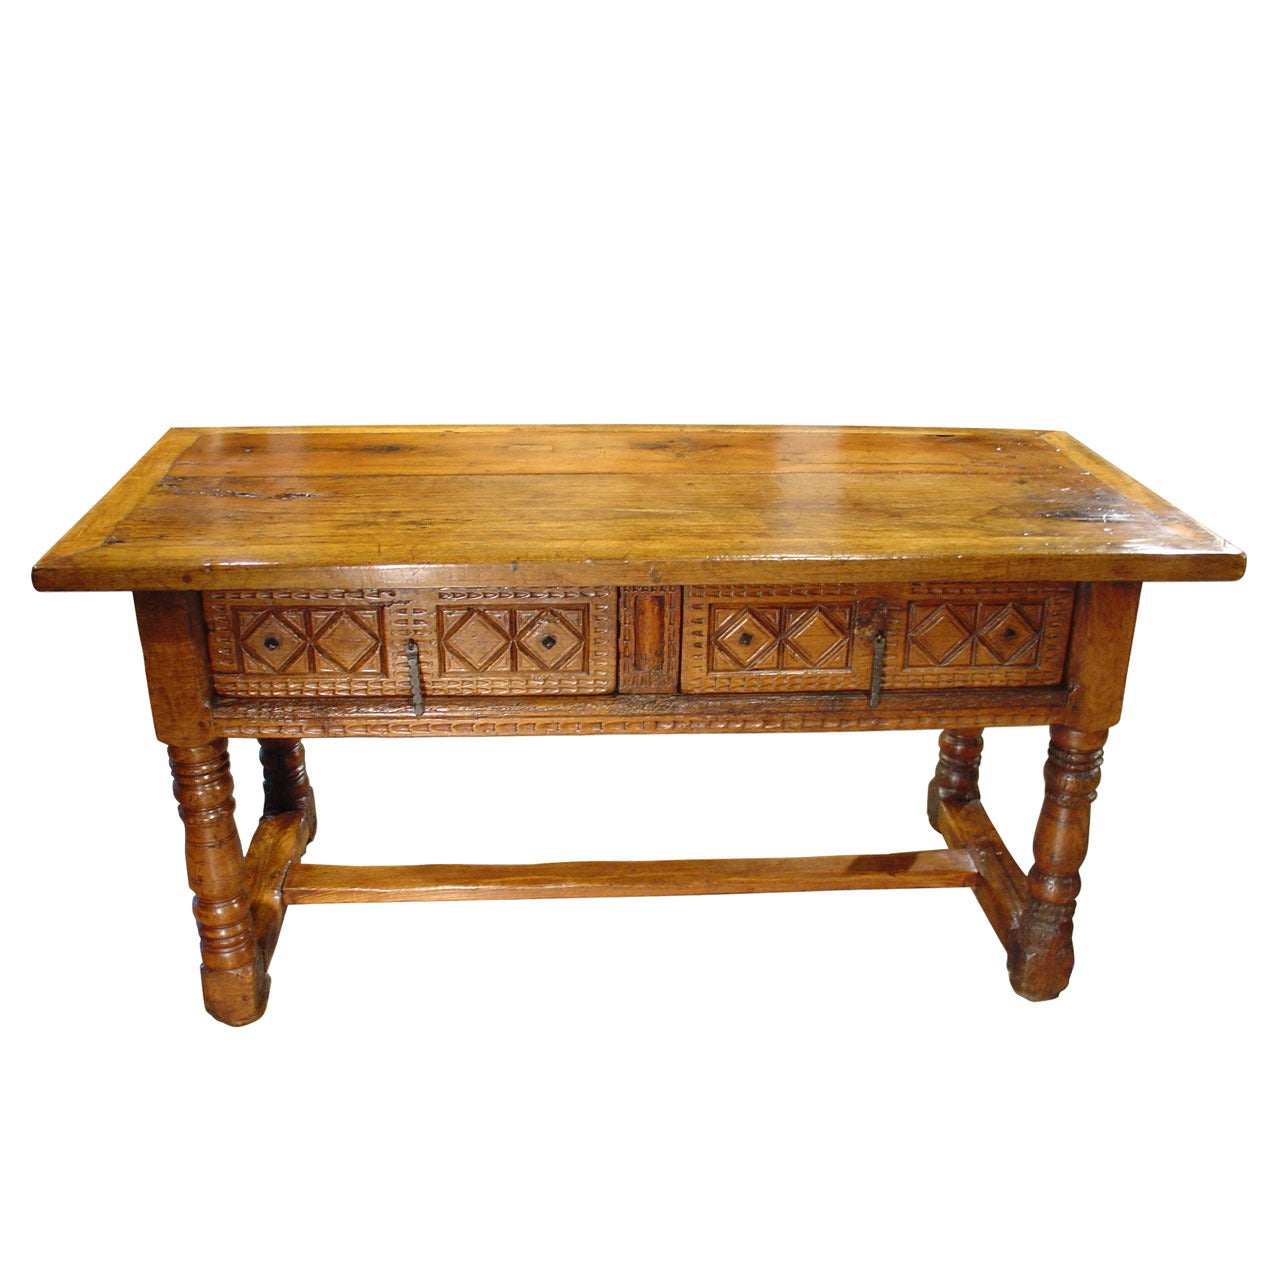 Carved 18th Century Spanish Desk or Table